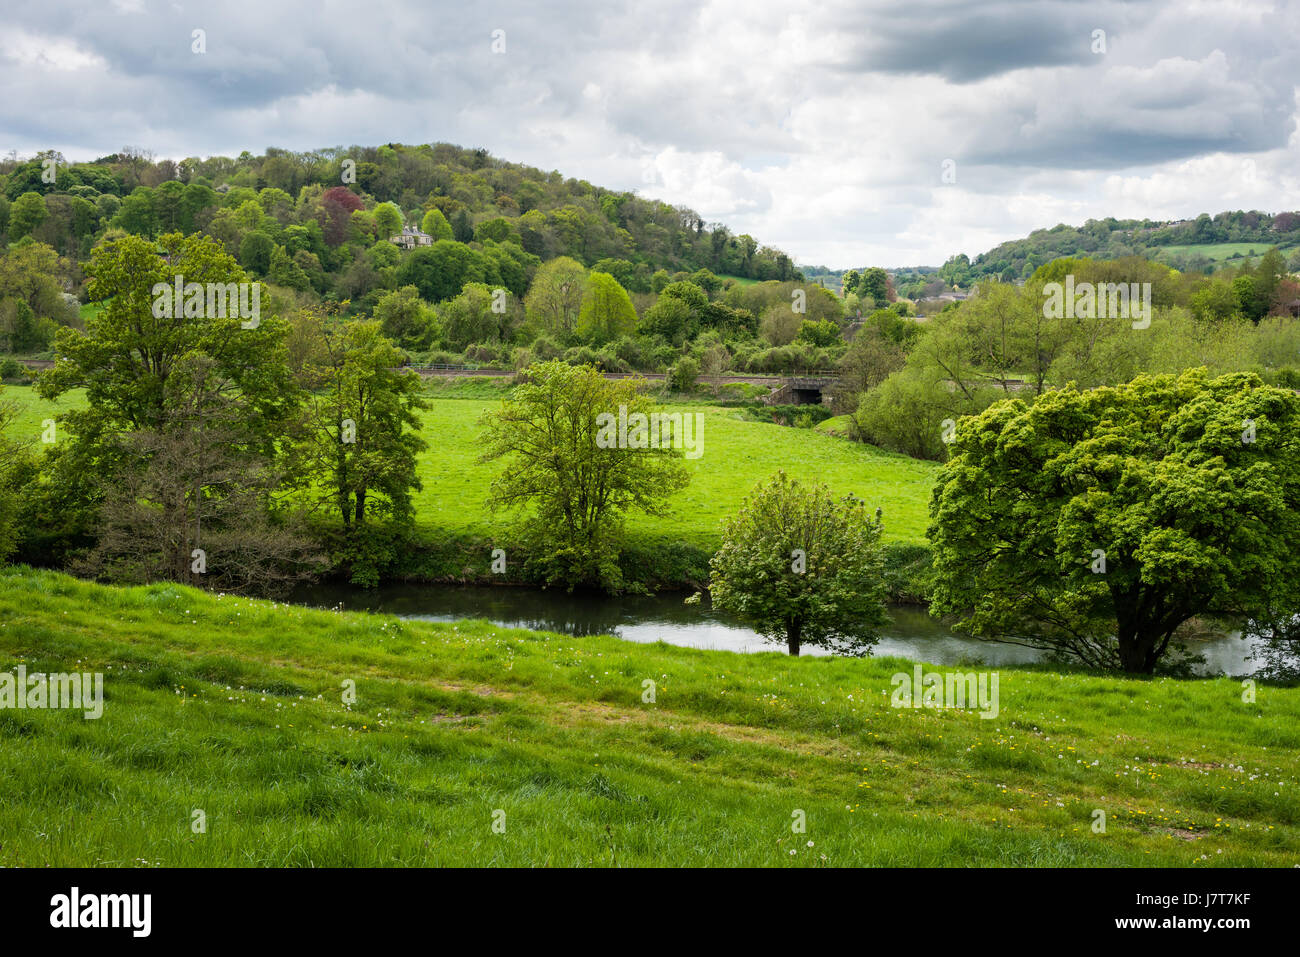 View over countryside in the Avon Valley at Monkton Combe near Bath, Somerset, England. Stock Photo